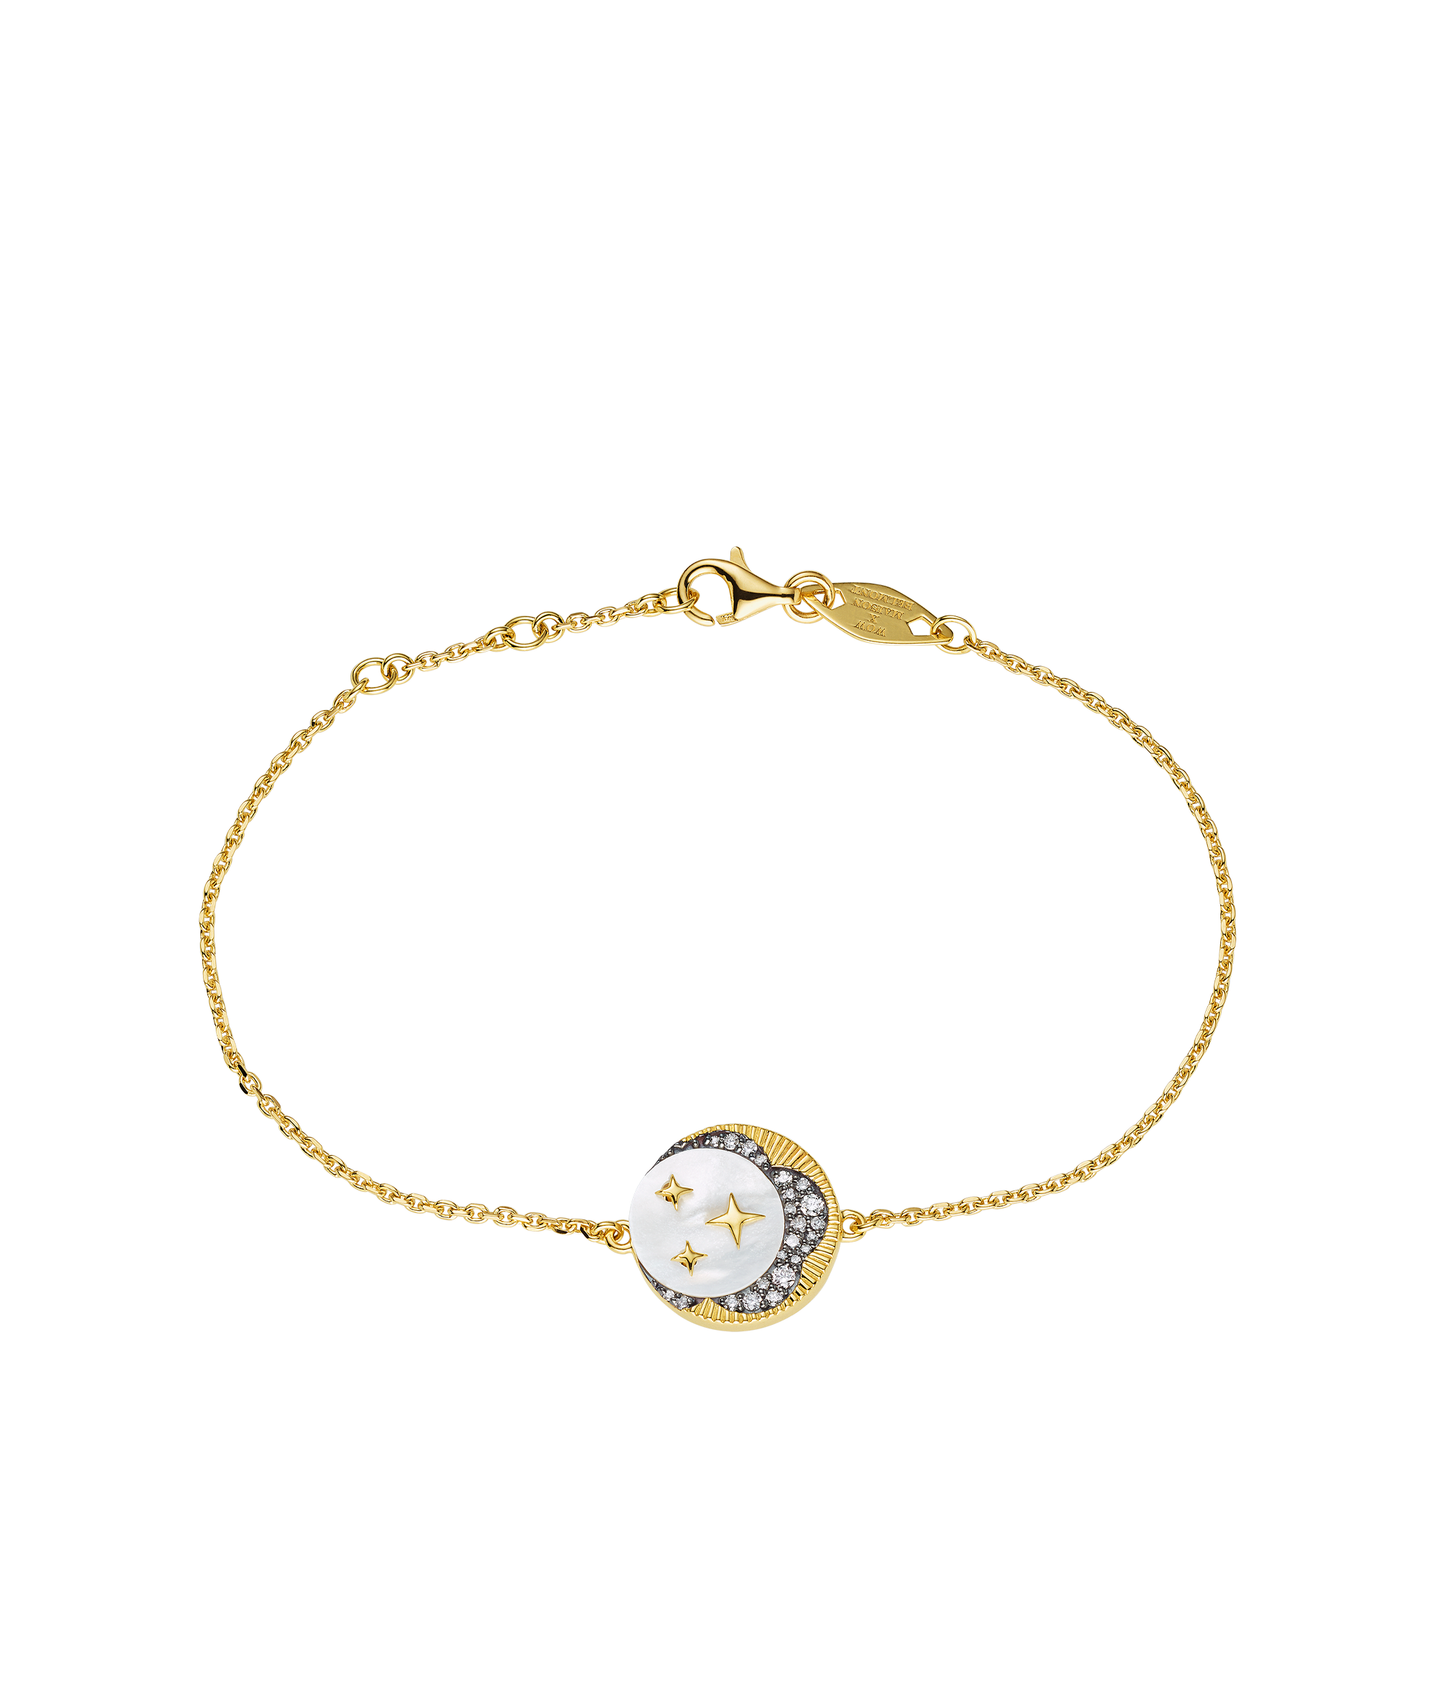 'Look Up At The Moon' Bracelet Mother-of-Pearl